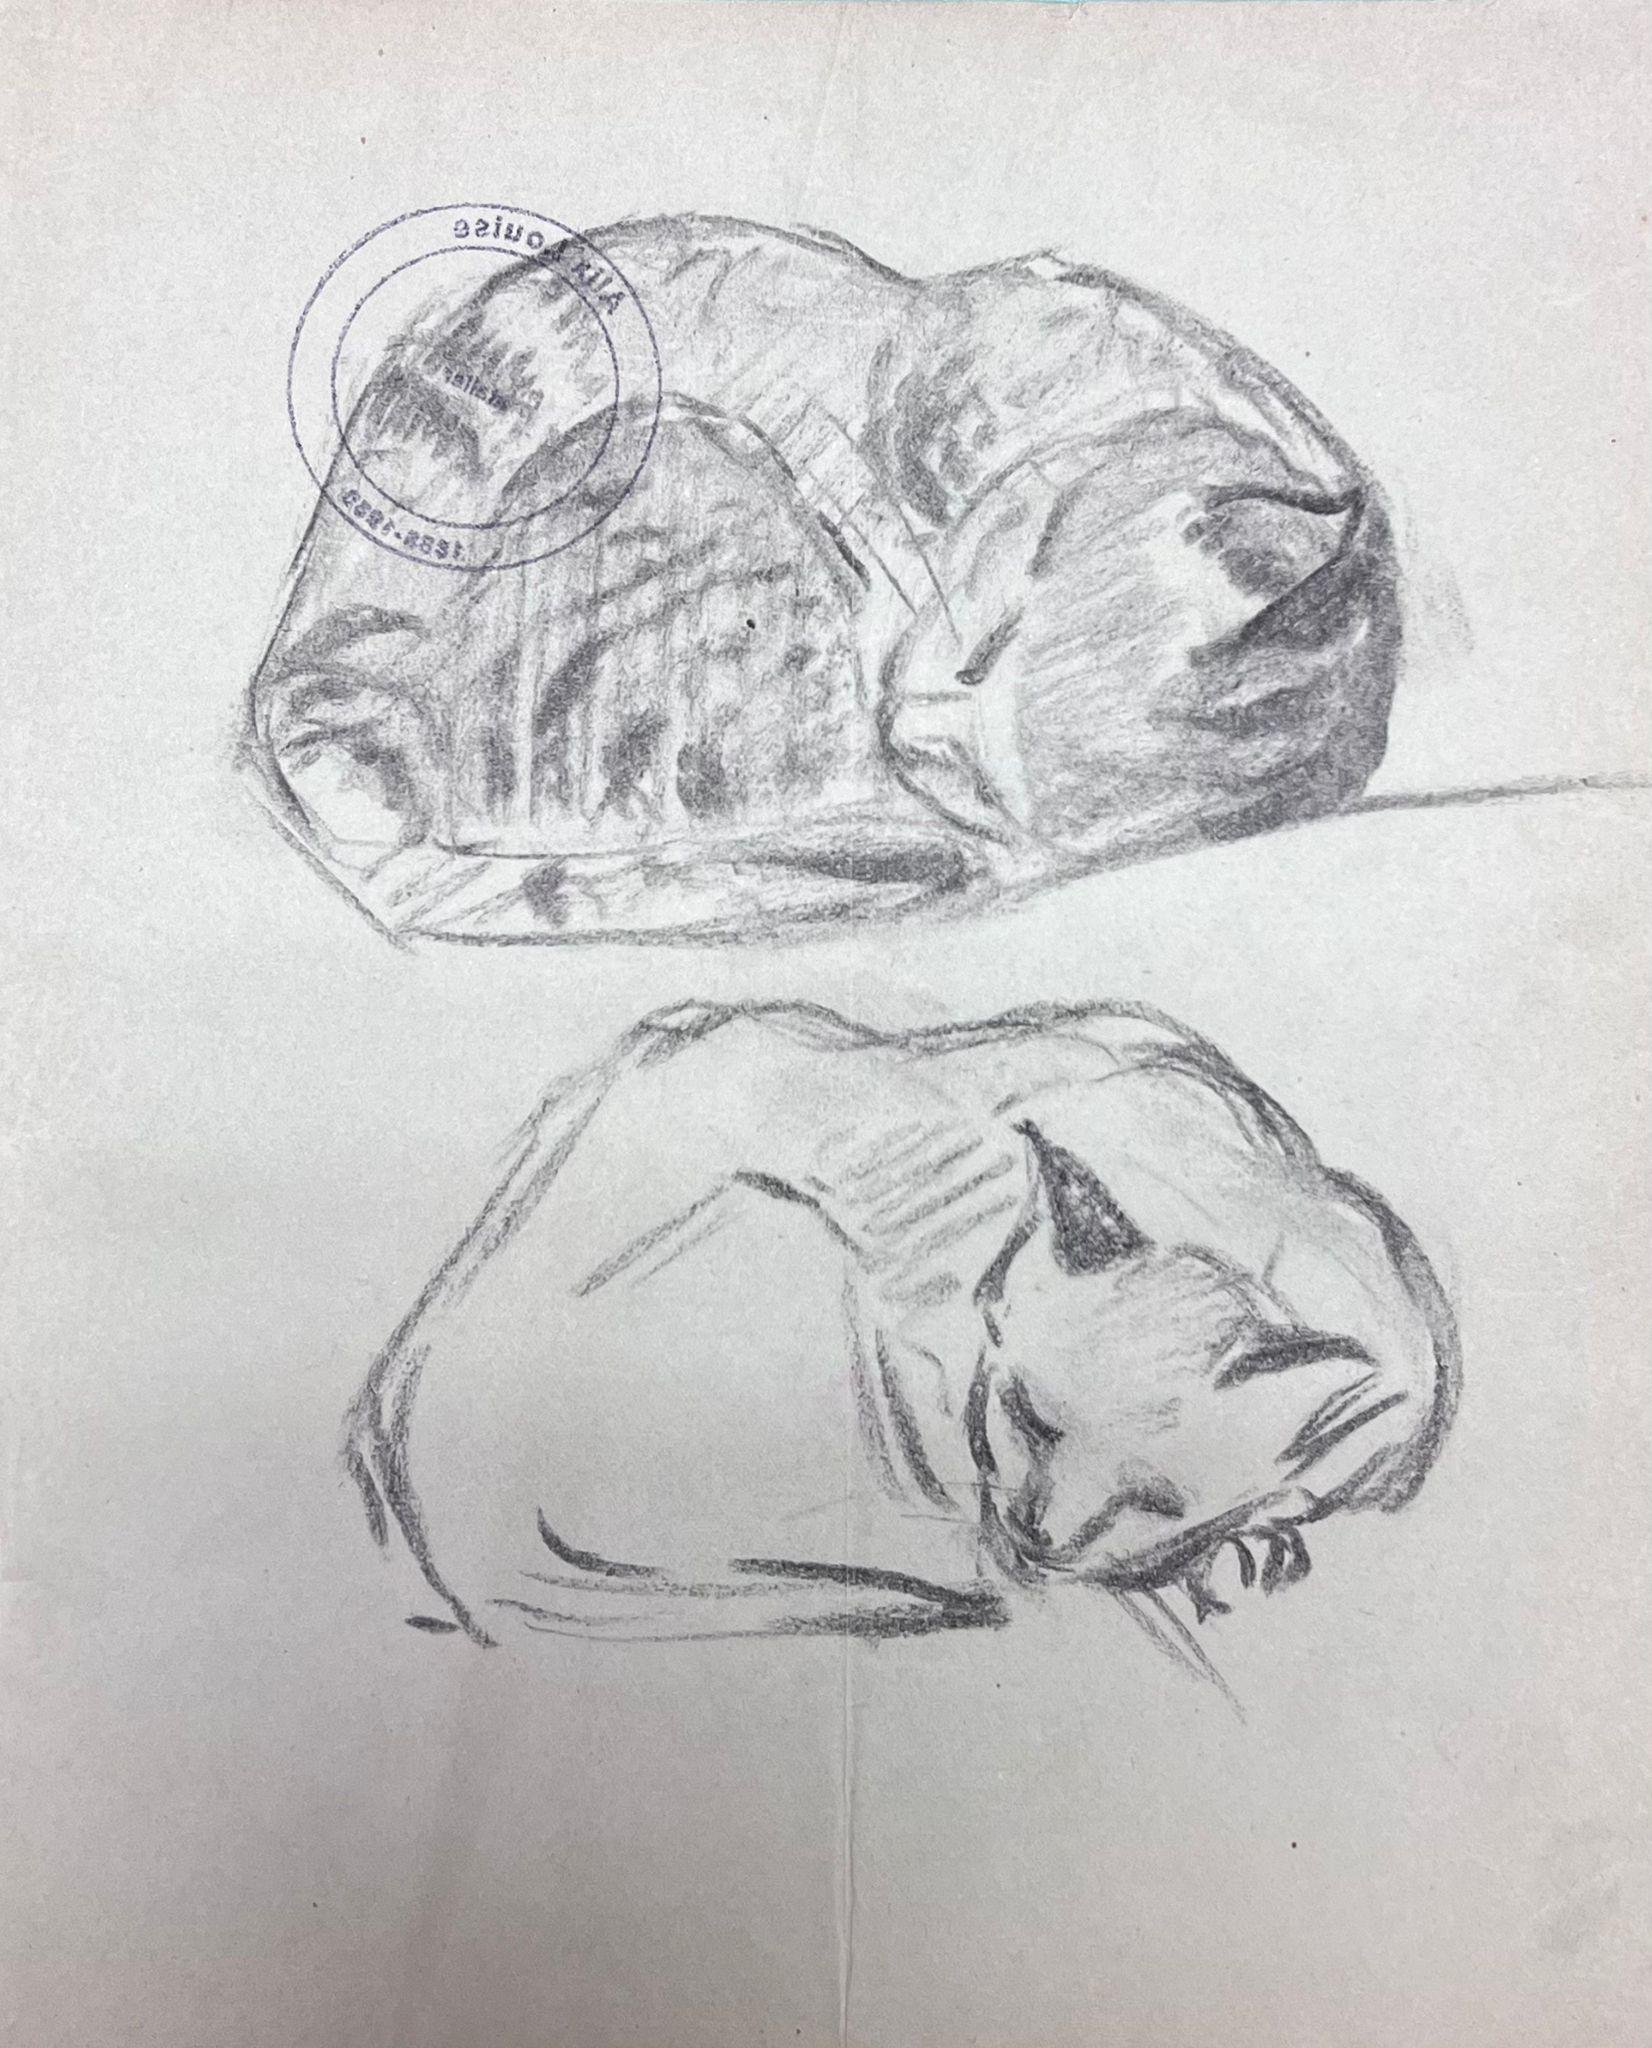 Louise Alix Animal Painting - French Impressionist Portrait of Curled Up Kittens Pencil Sketch